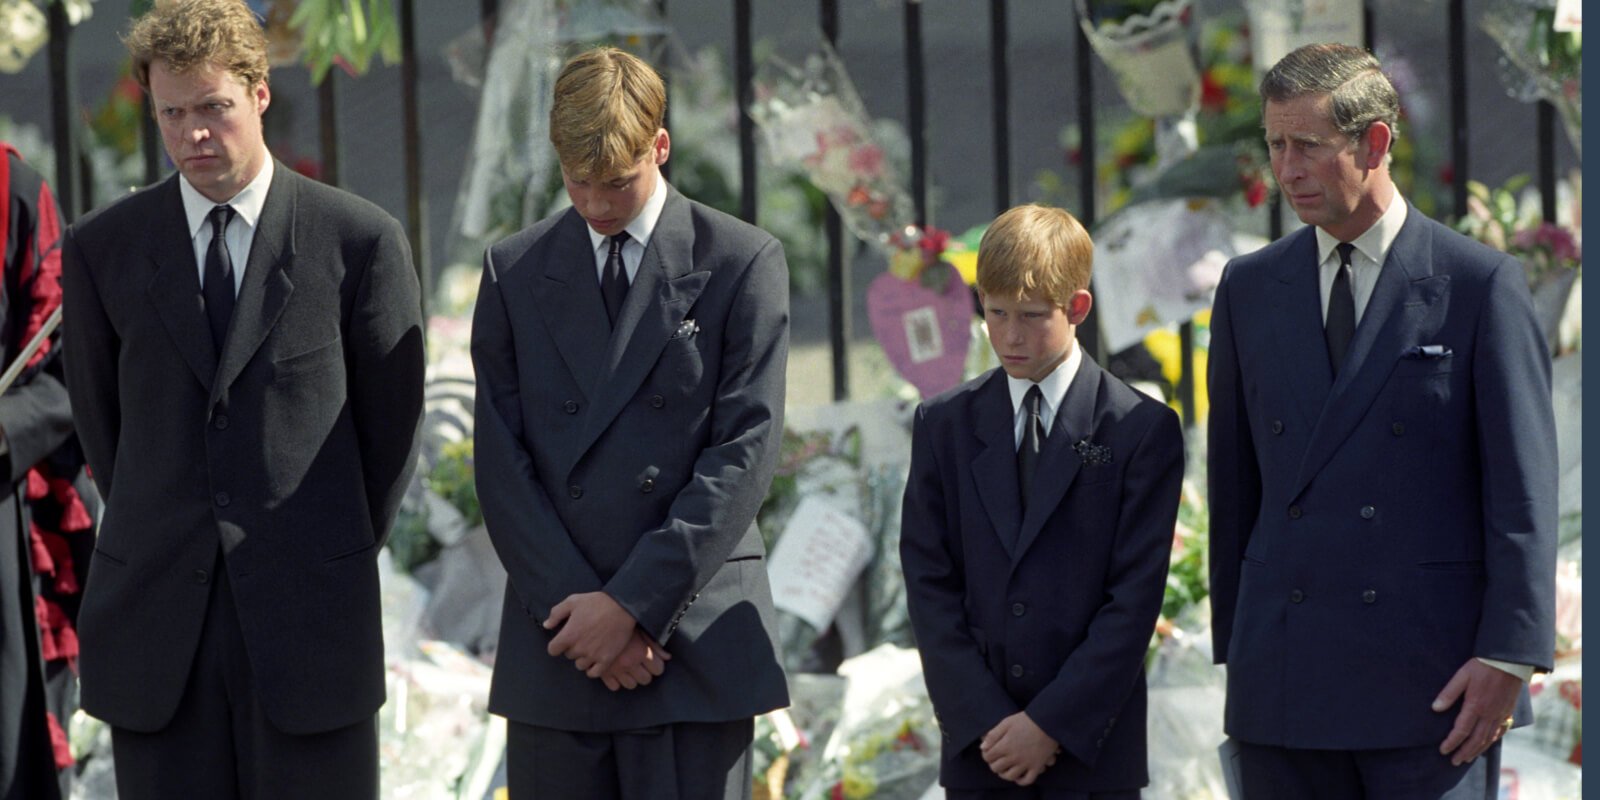 Charles Spencer, Prince Harry, Prince William and King Charles III at the funeral of Princess Diana in 1997.